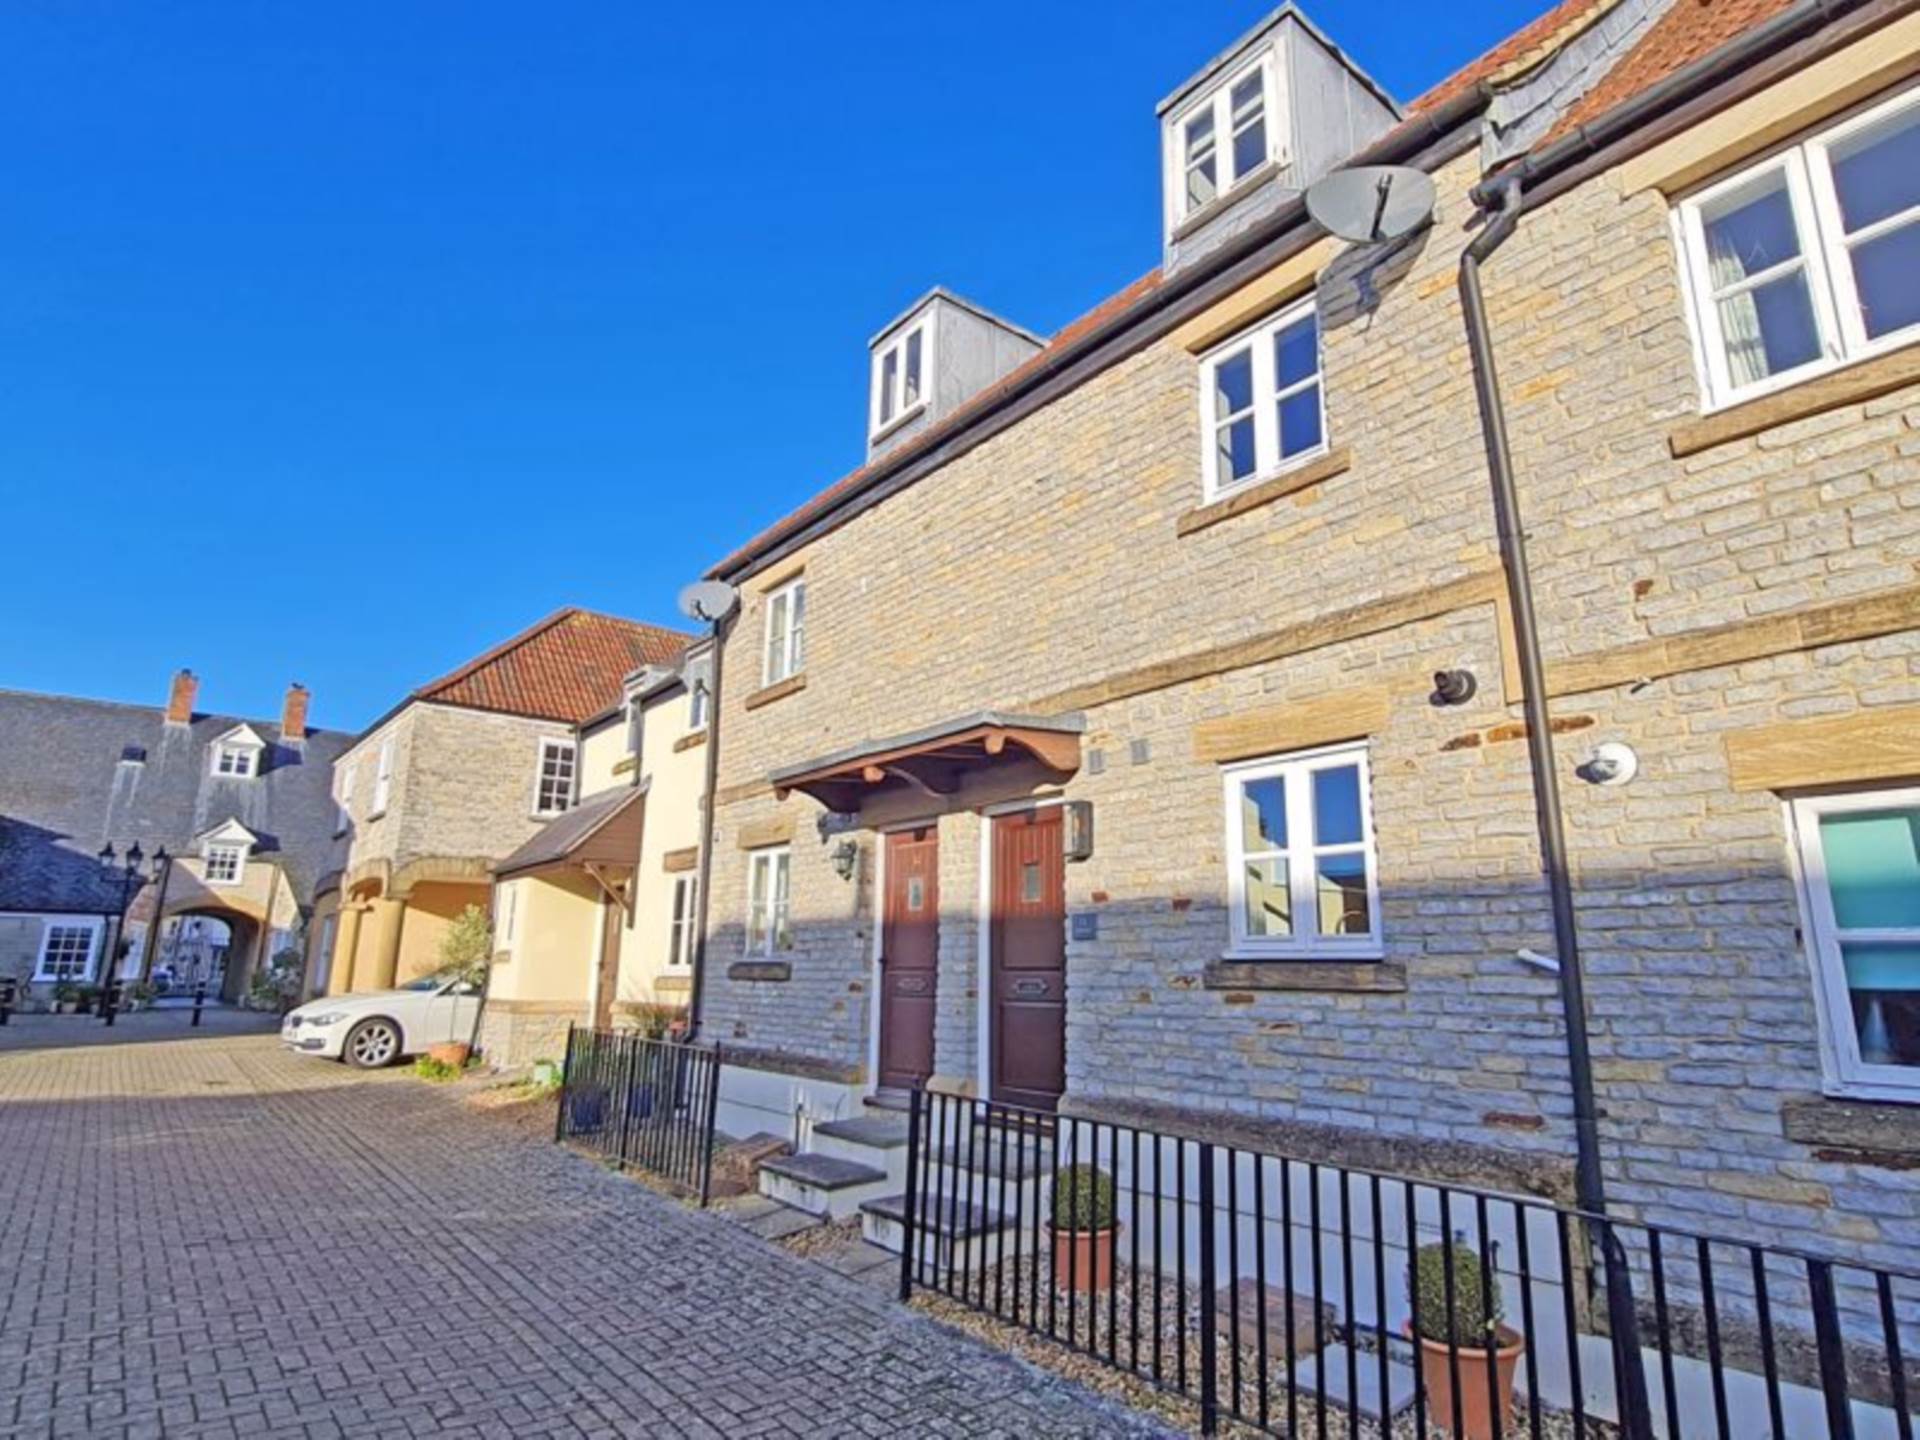 3 bed Mid Terraced House for rent in Somerton. From Swallows Property Letting - Frome